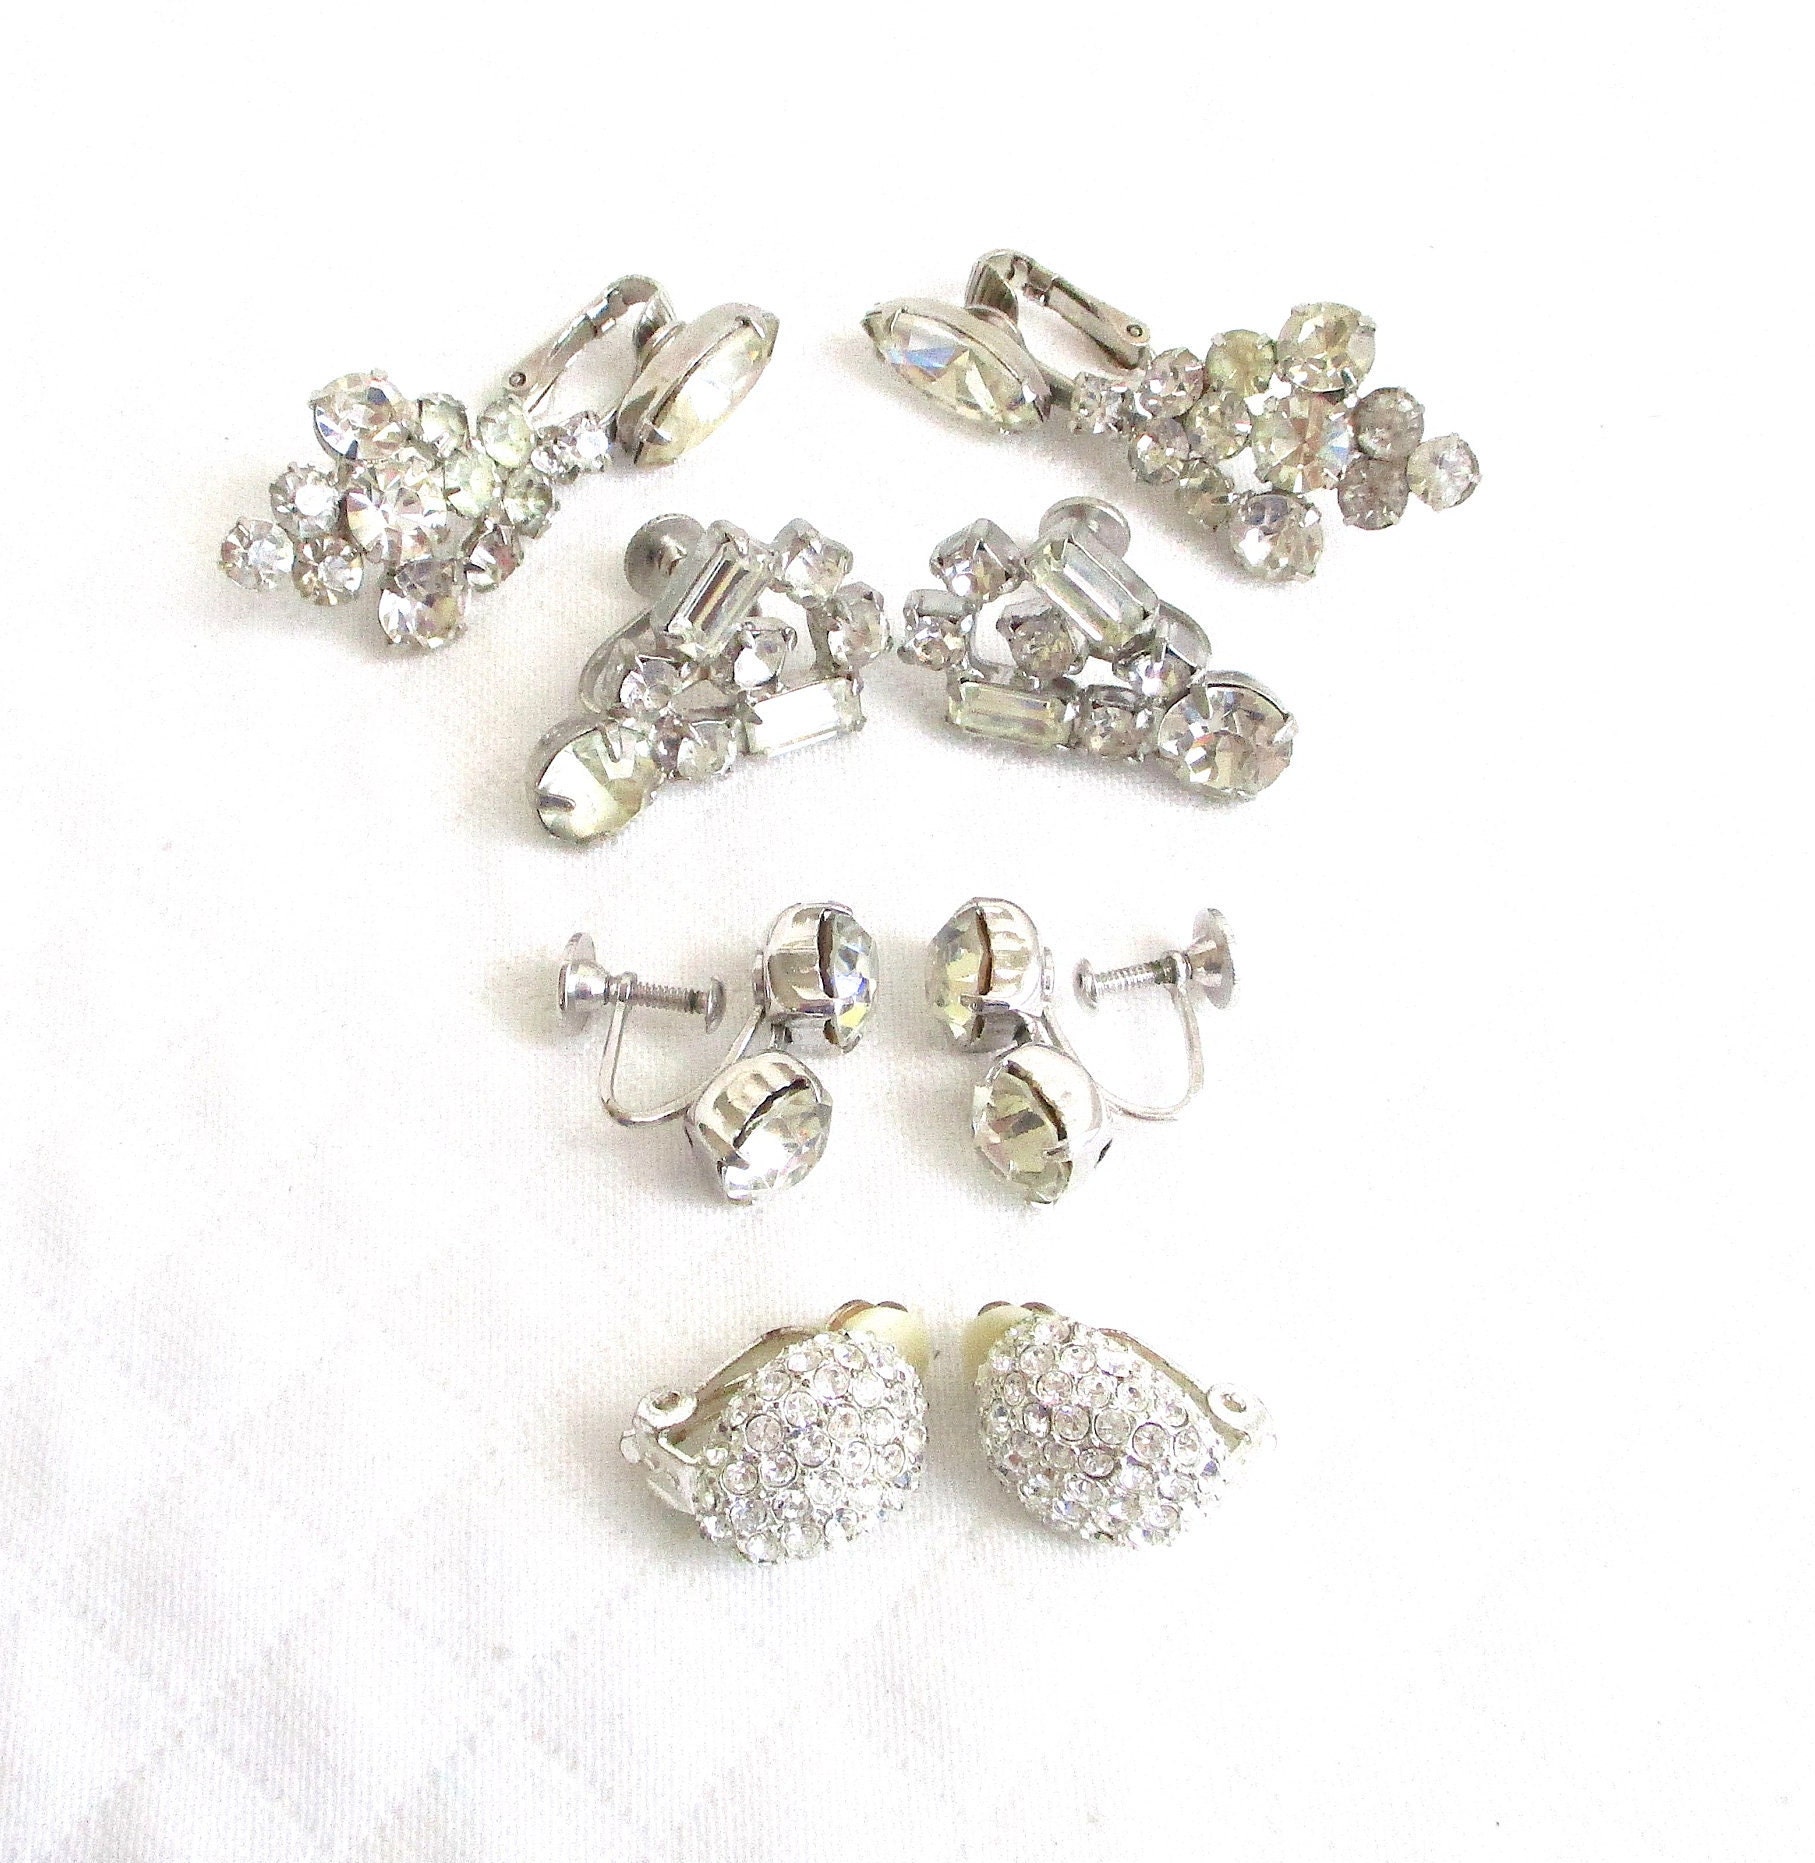 Buy Lot Clip on Earrings Online In India - Etsy India